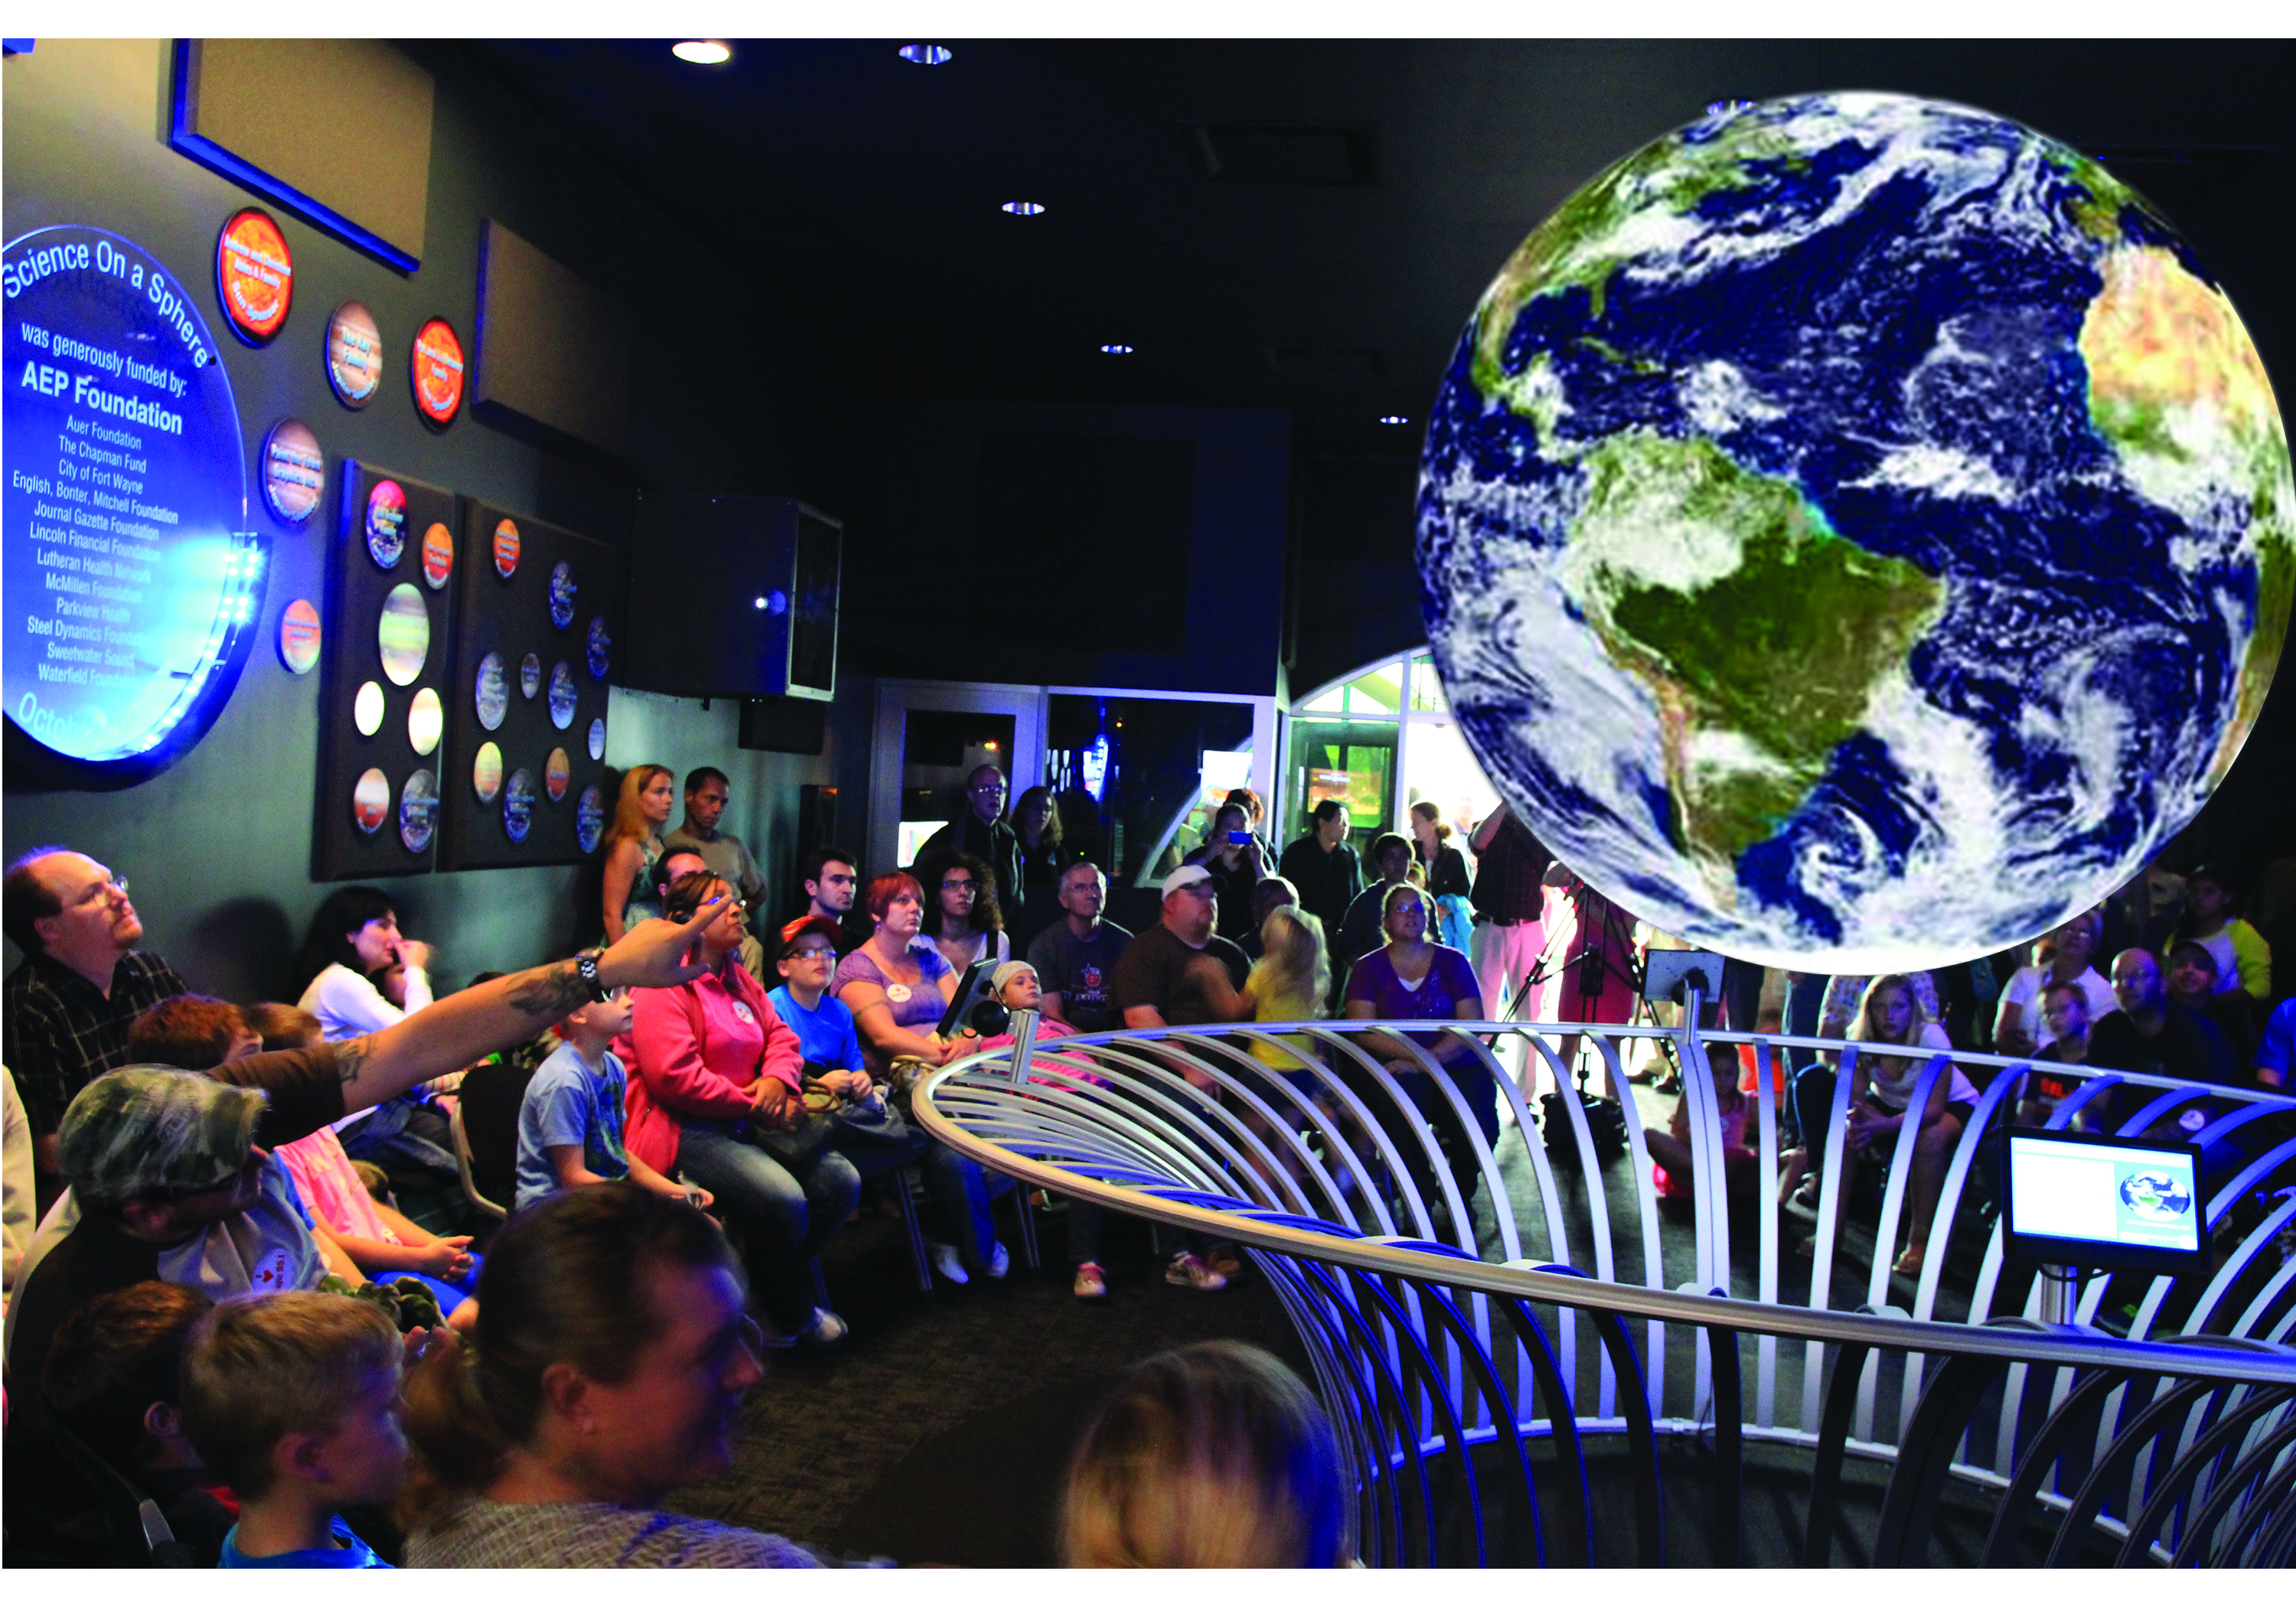 A large crowd of people surround Science On a Sphere looking at satellite imagery of Earth